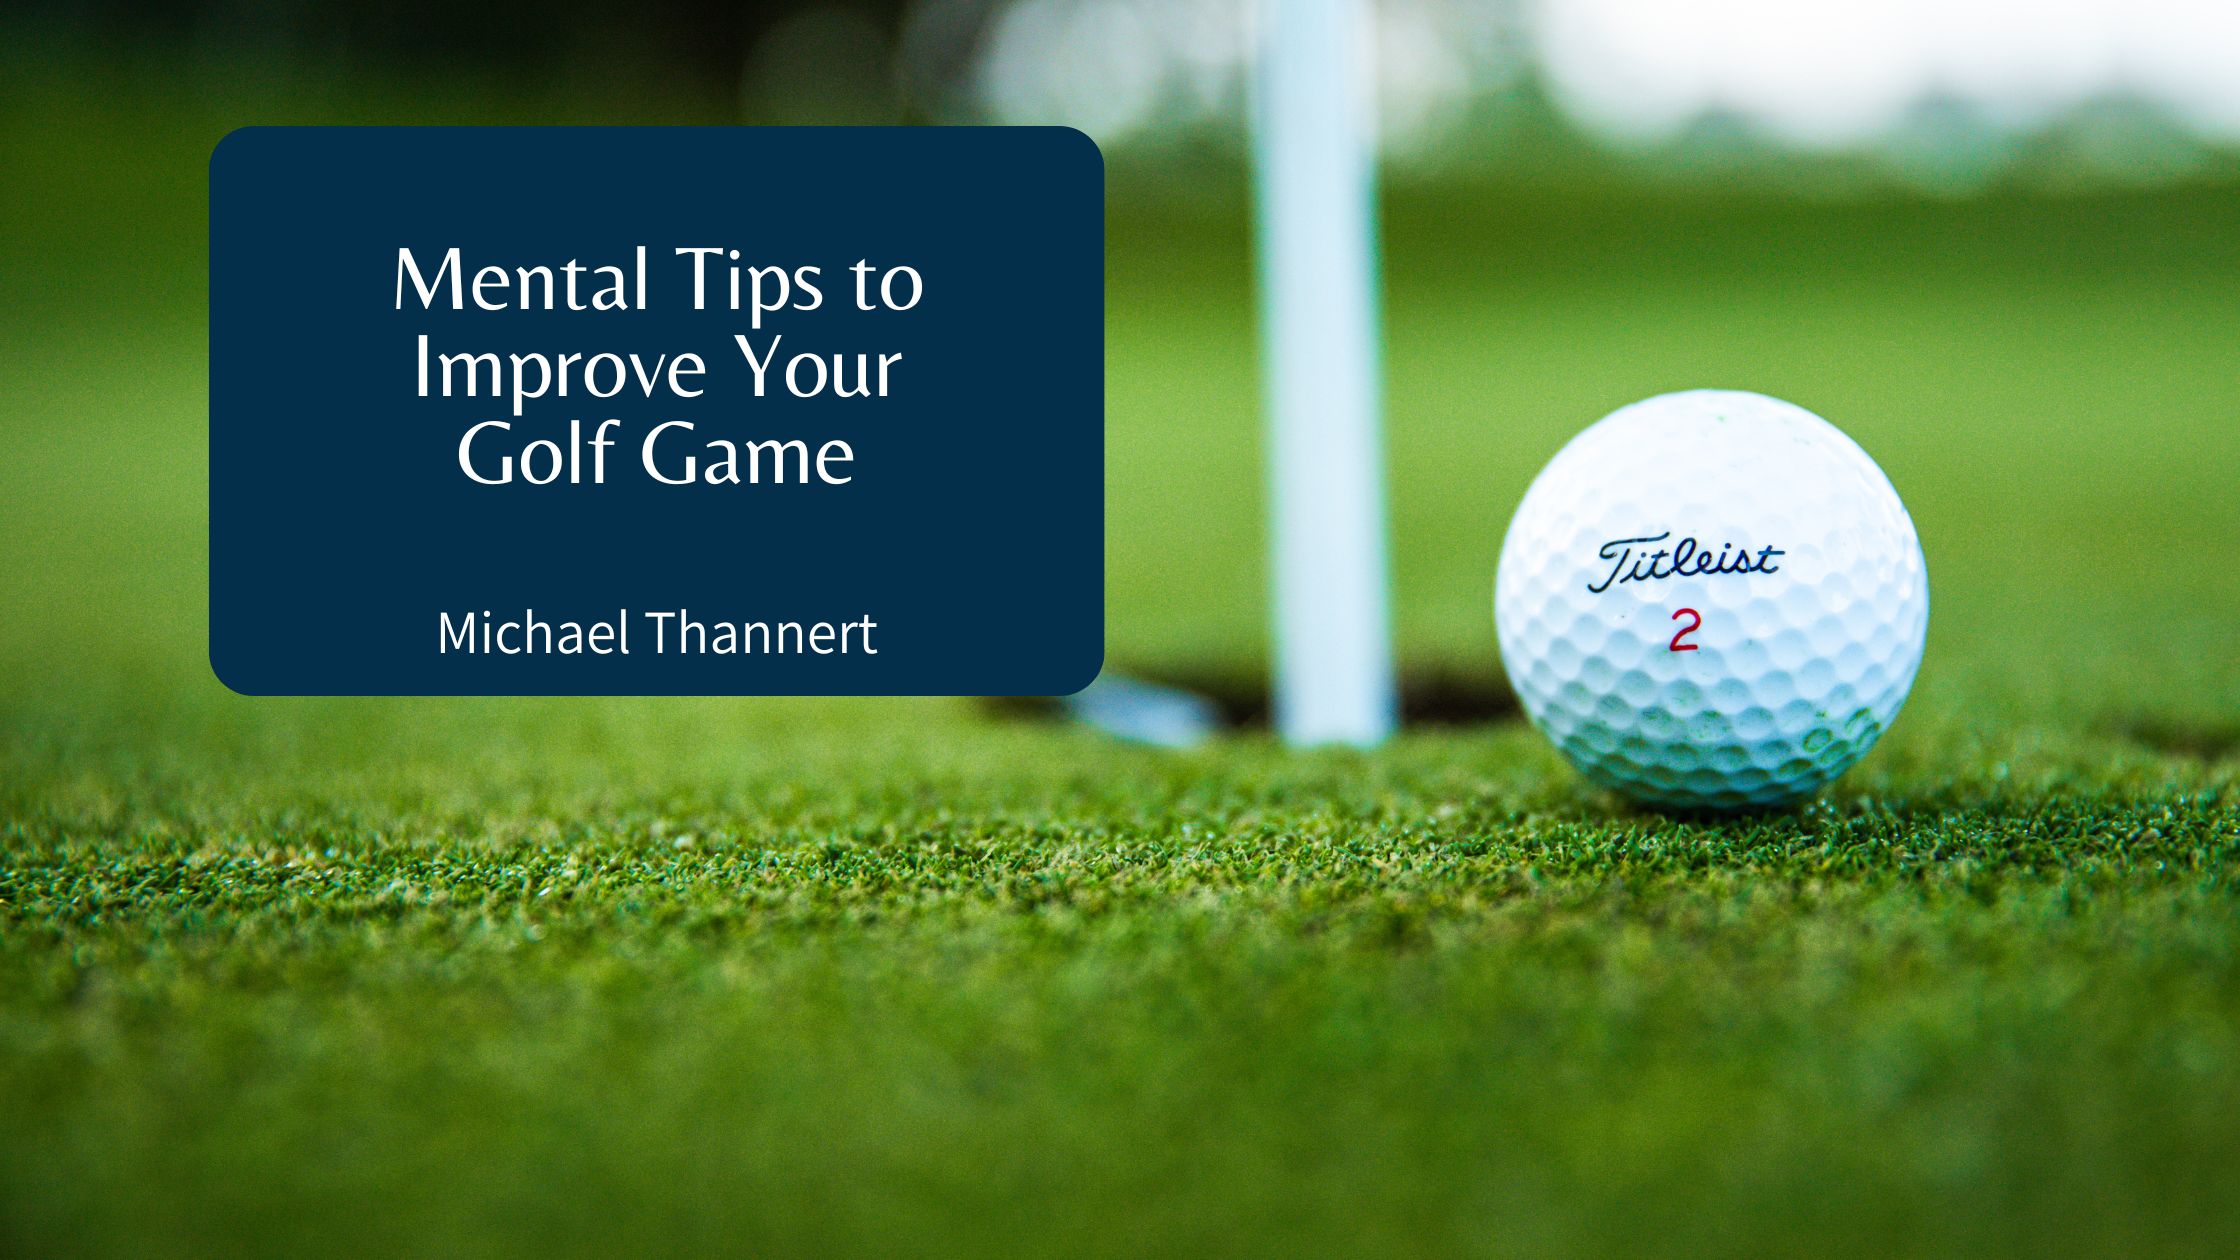 Michael Thannert - Mental Tips to Improve Your Golf Game